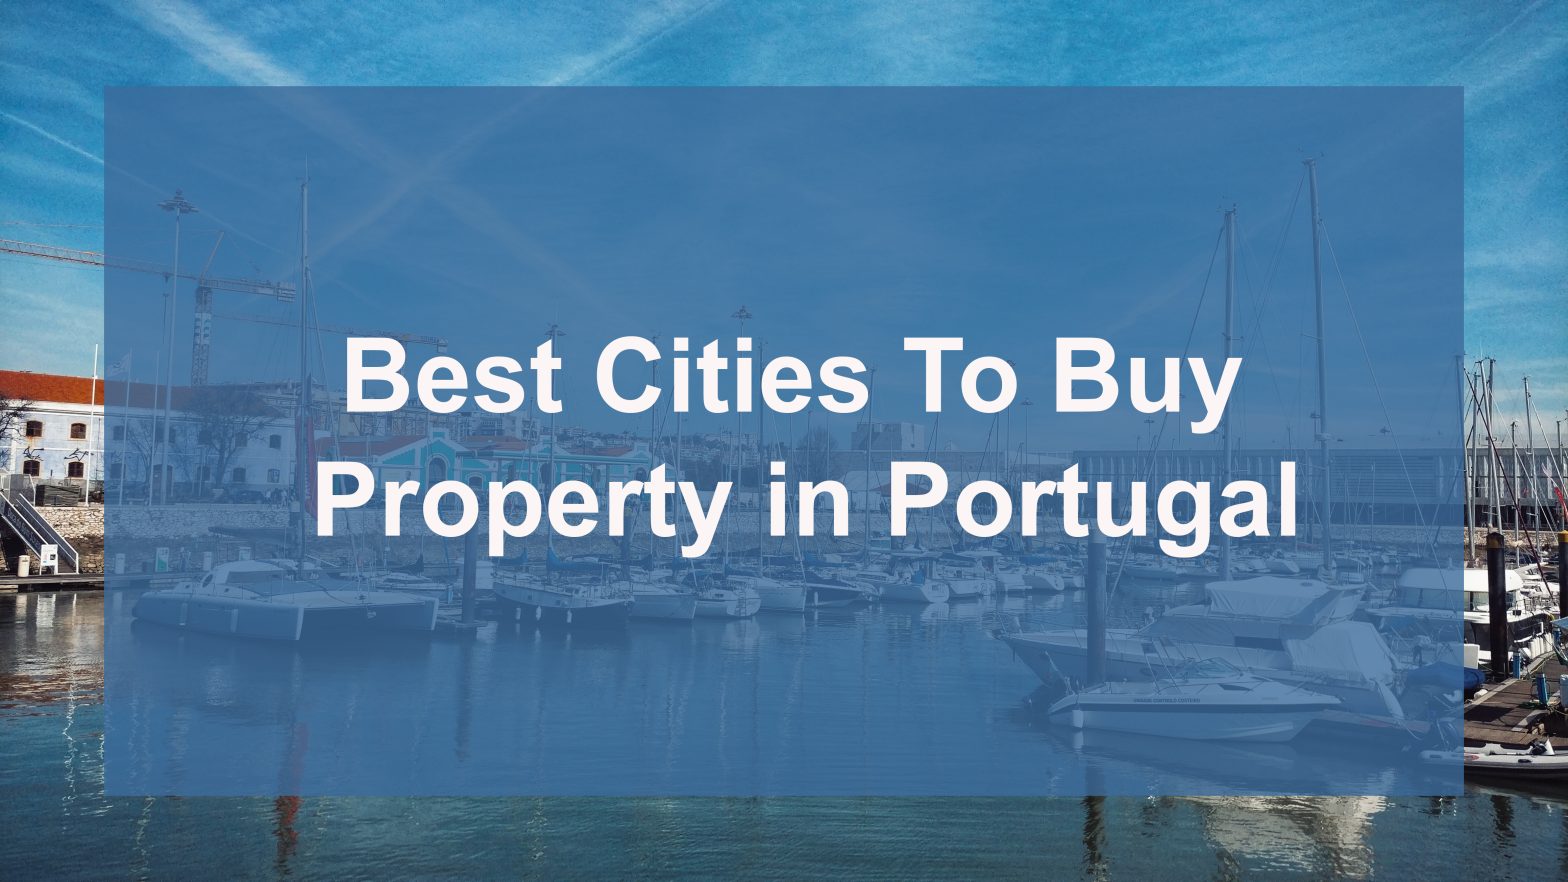 Best Cities To Buy Property in Portugal